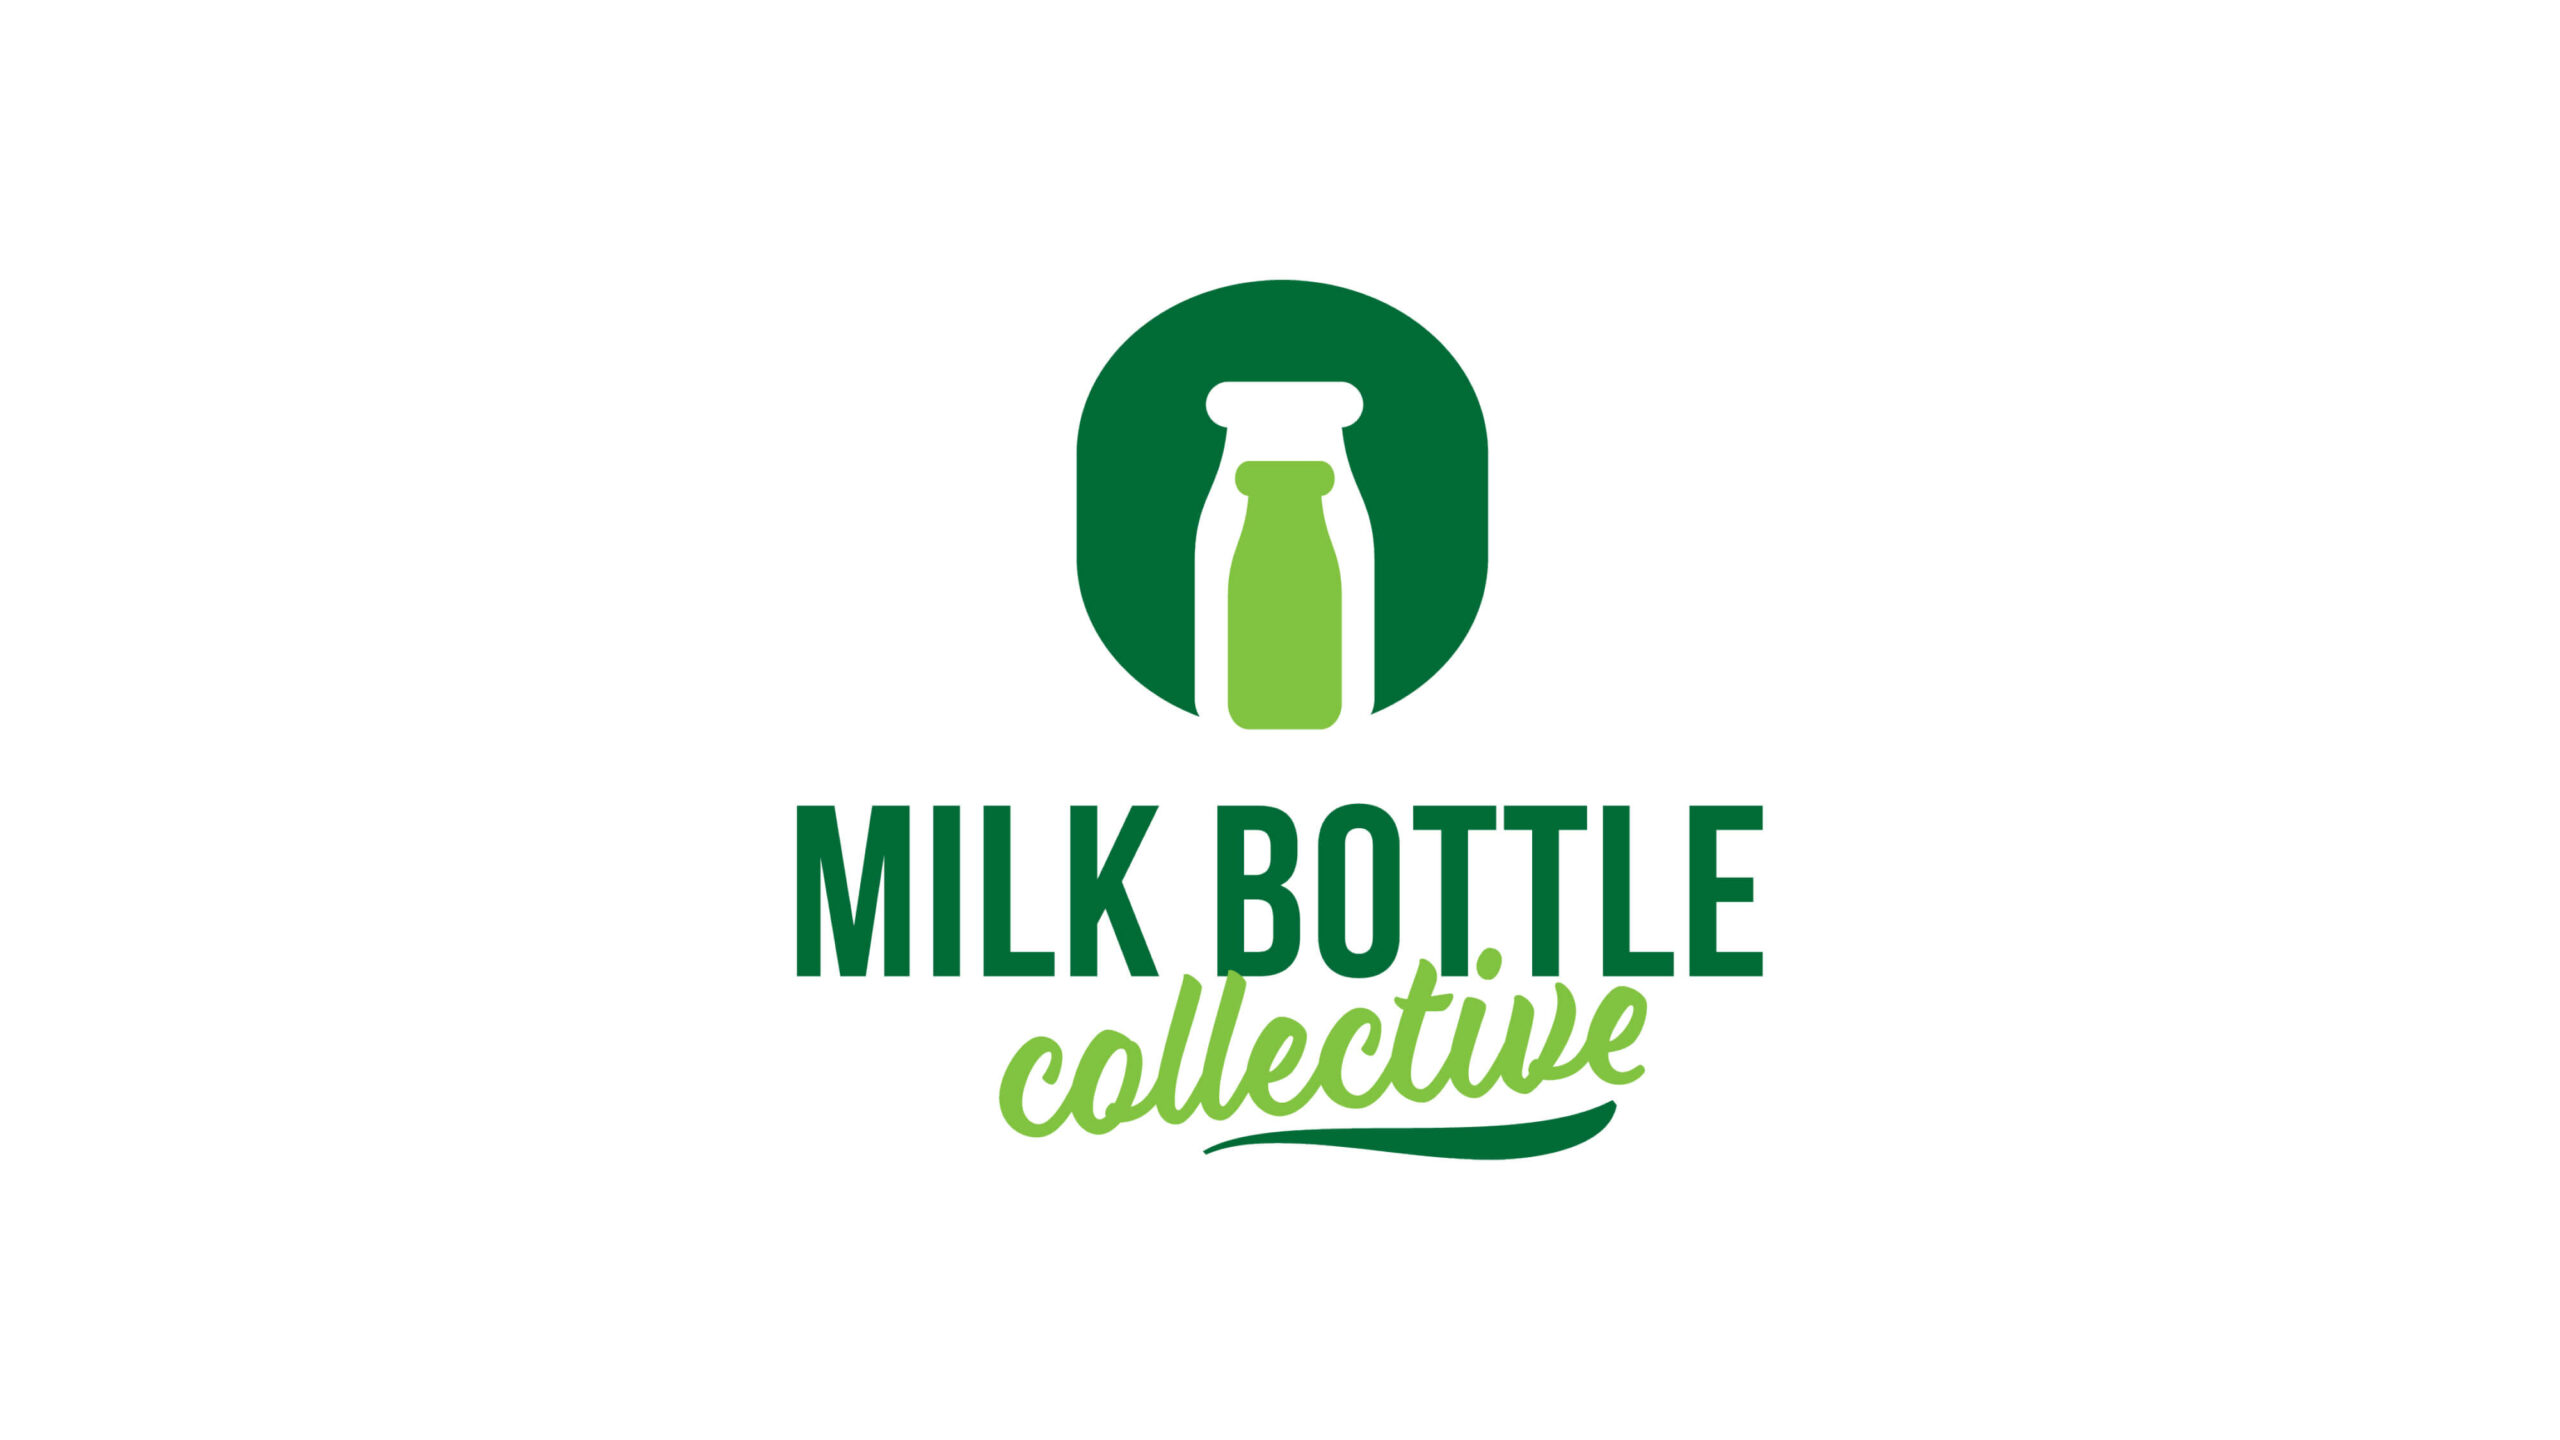 Marketing and Design Agency - Poloko - Northern Beaches - Milk bottle Collective